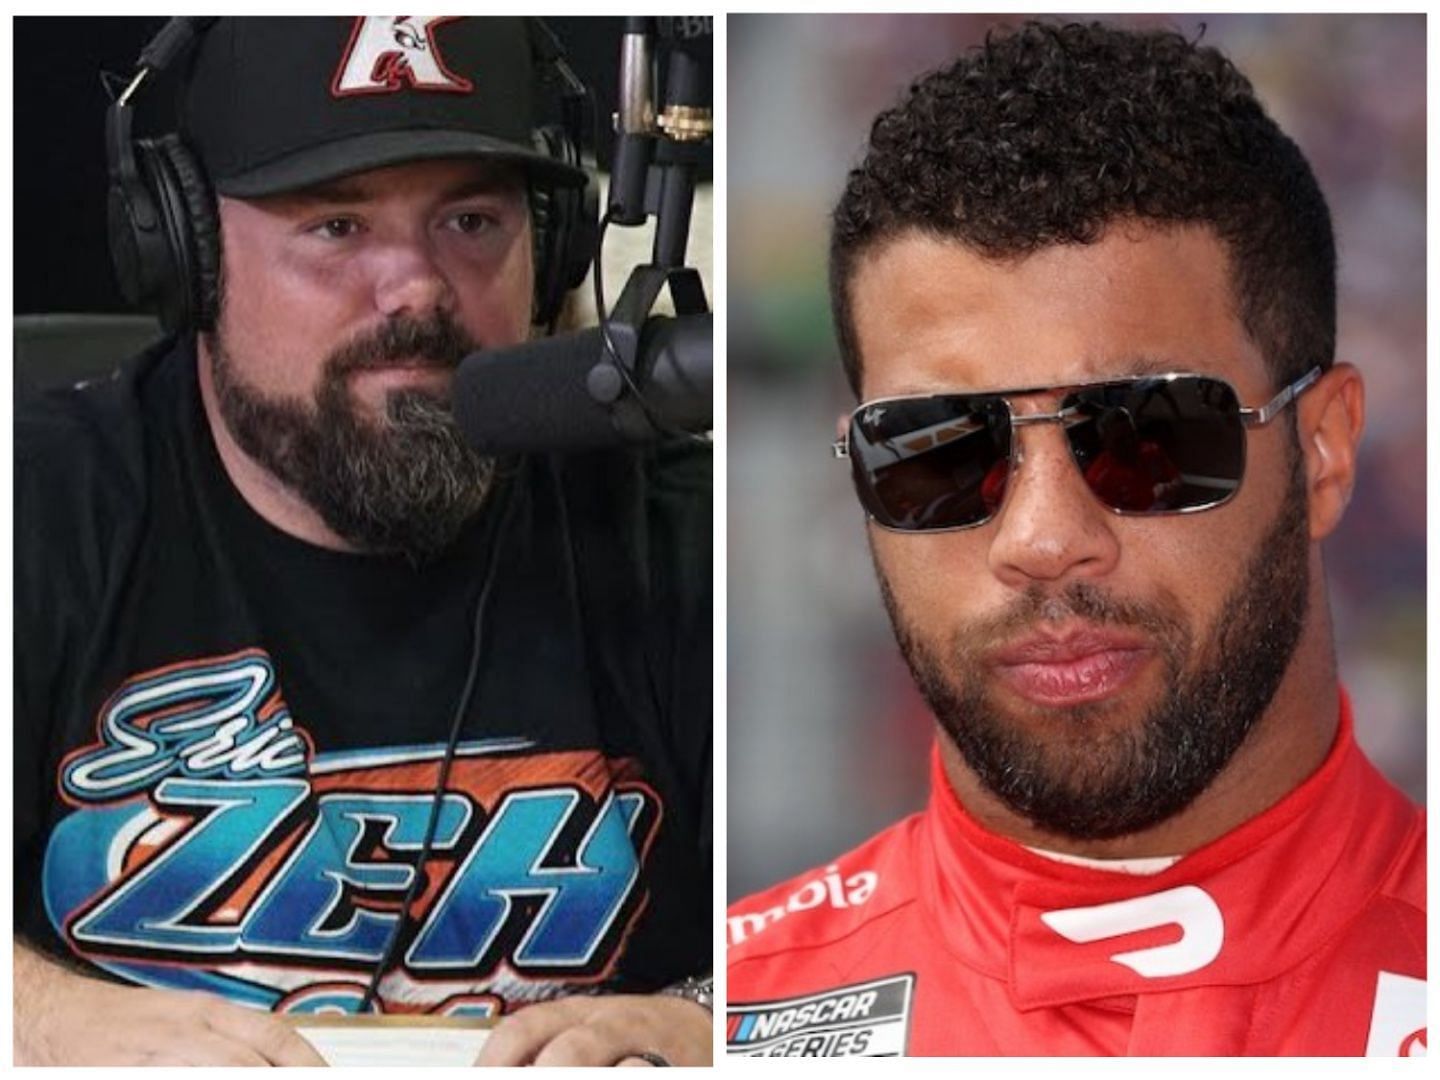 Bubba Wallace and his spotter